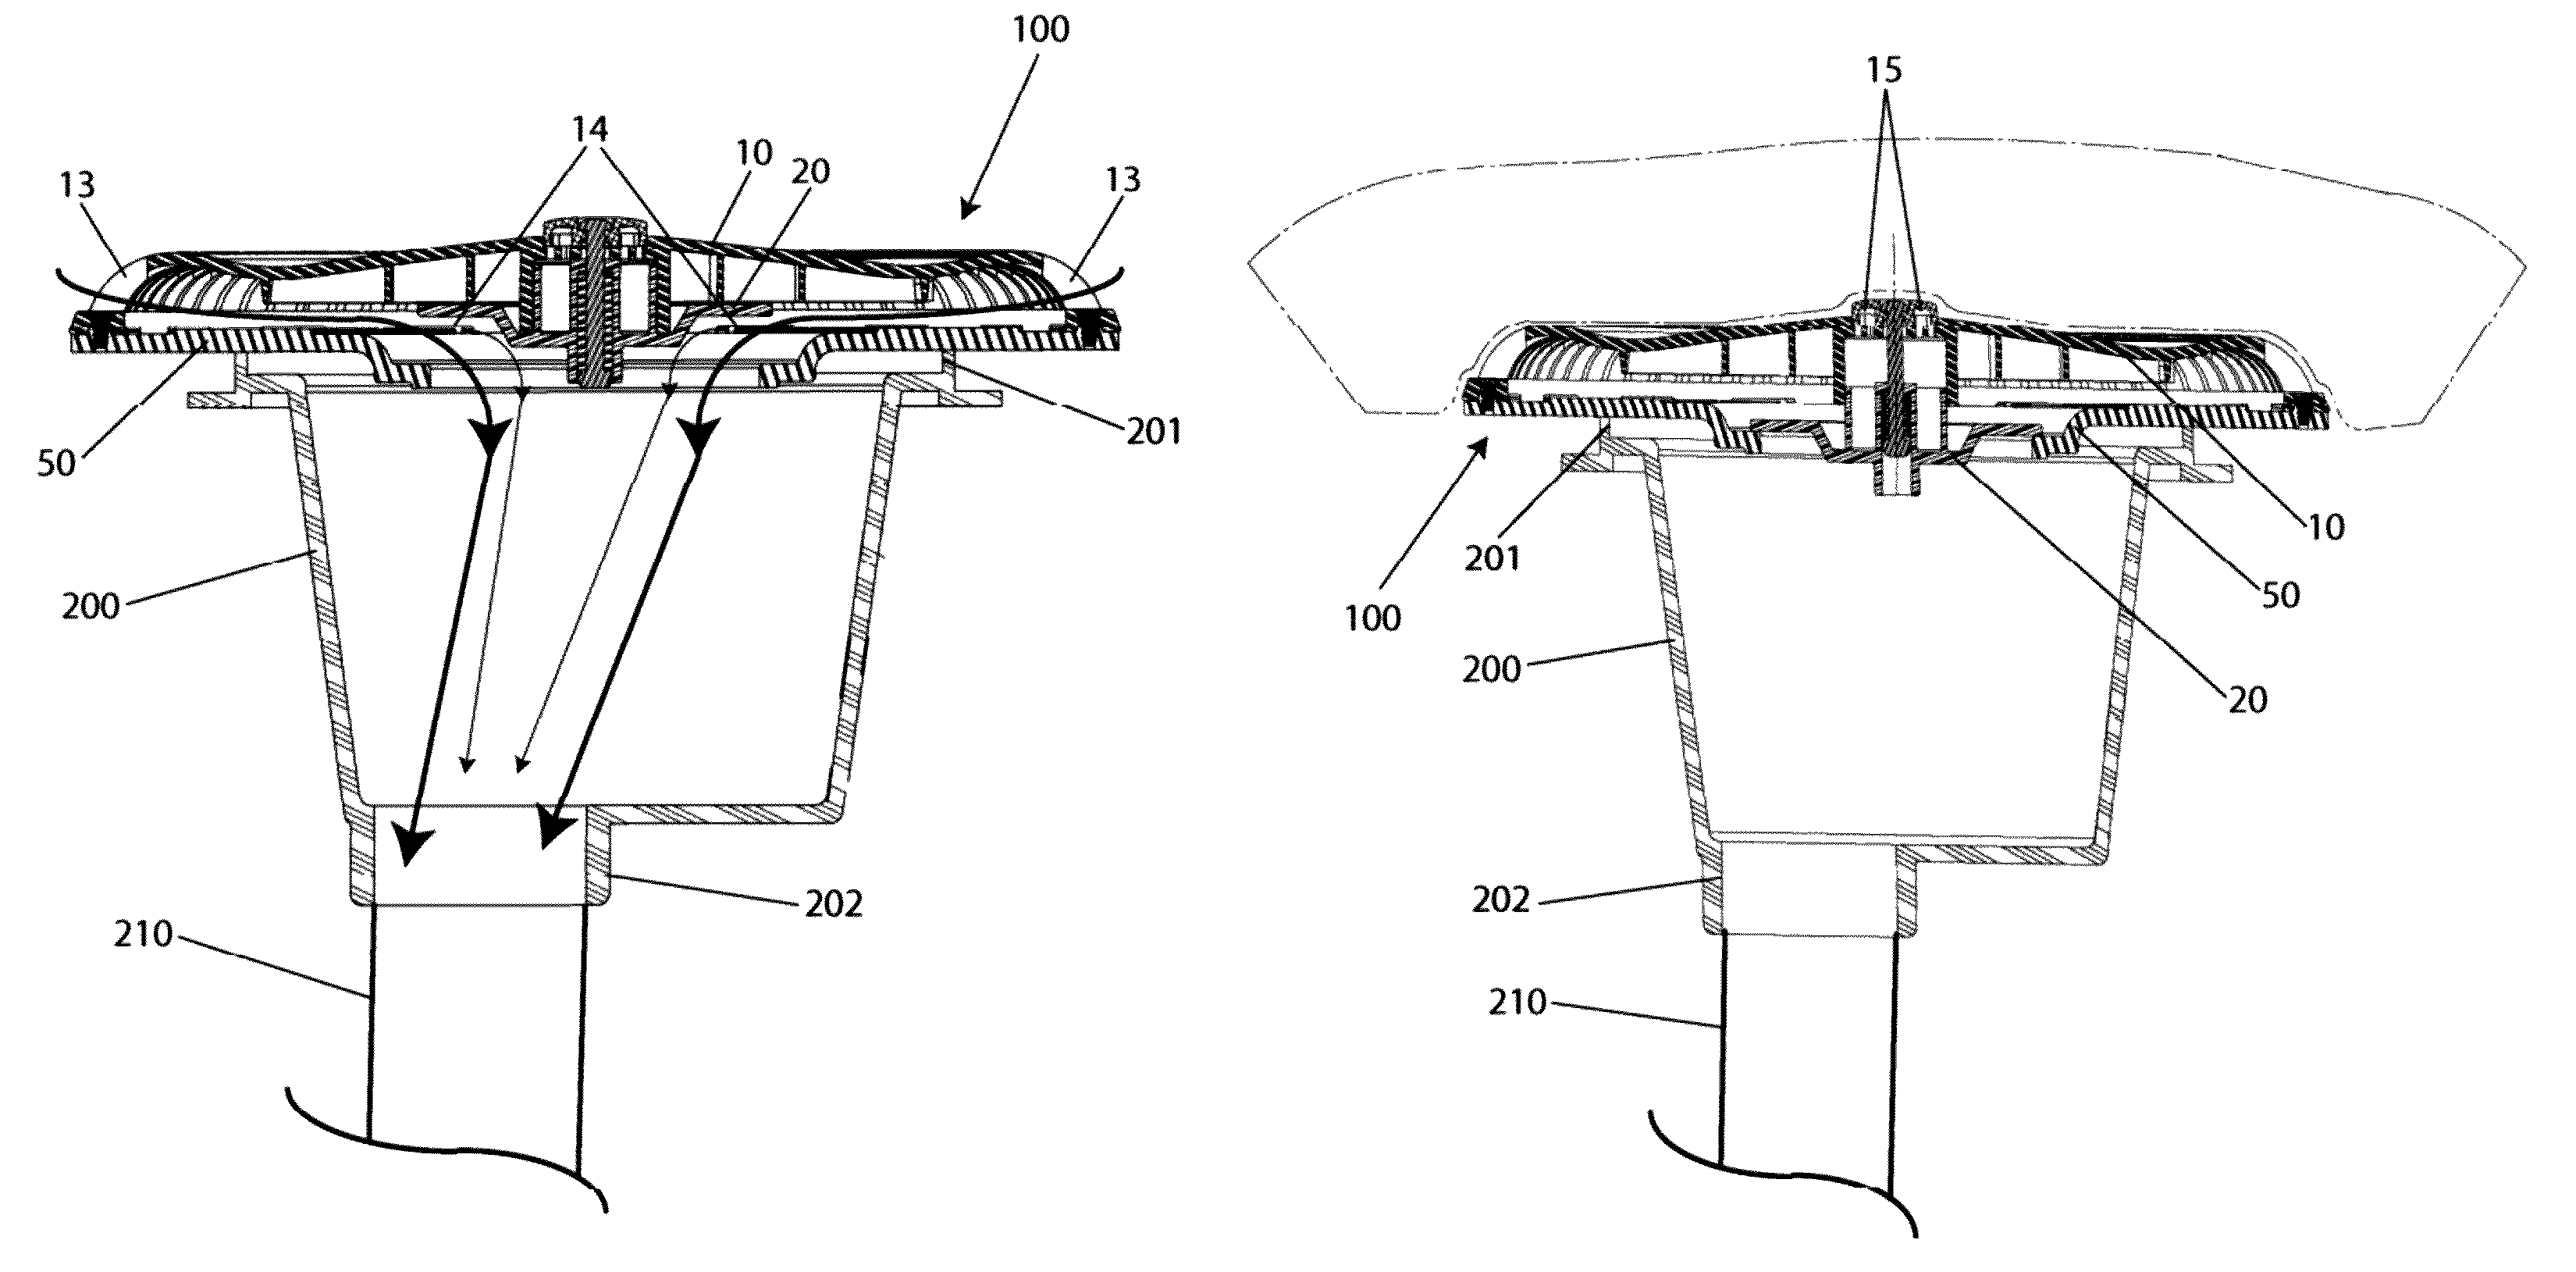 Safety swimming pool drain apparatus that prevents the entrapment of a person